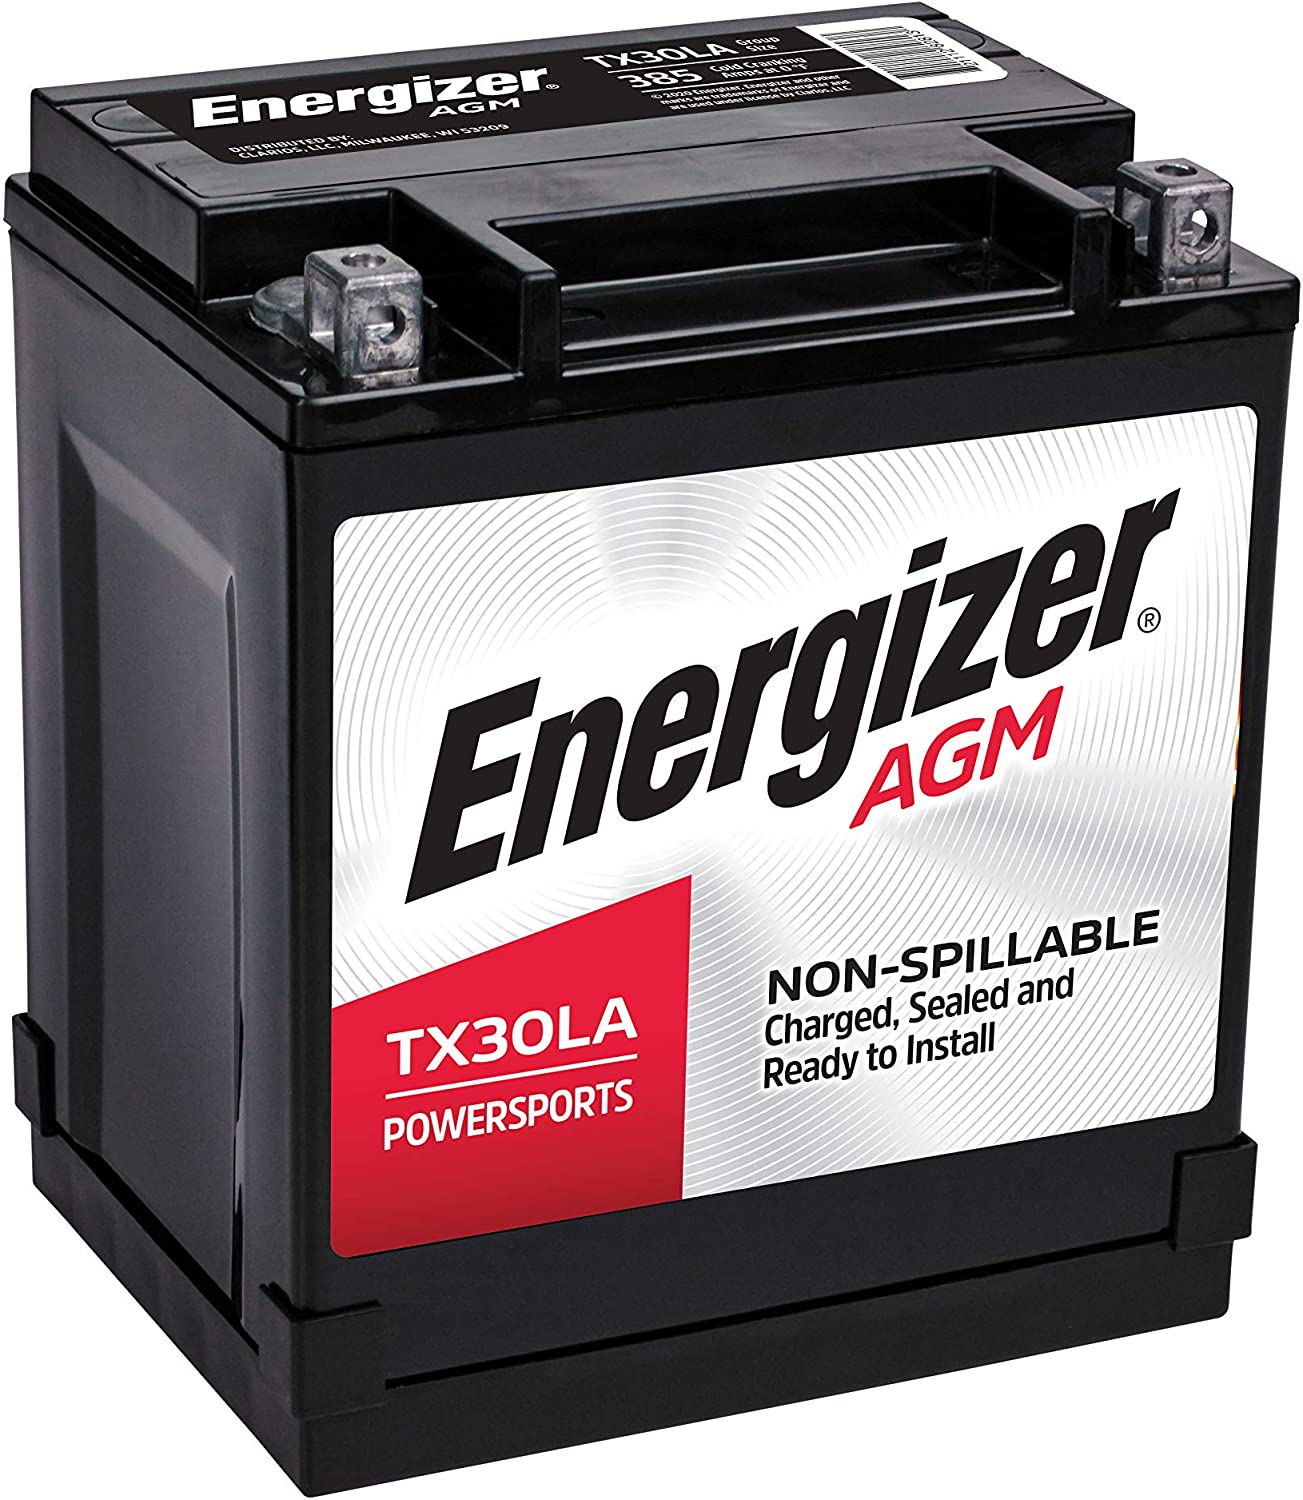 Energizer - ETX30LA TX30LA AGM Motorcycle and ATV 12V Battery, 385 Cold Cranking Amps and 30 Ahr, Replaces